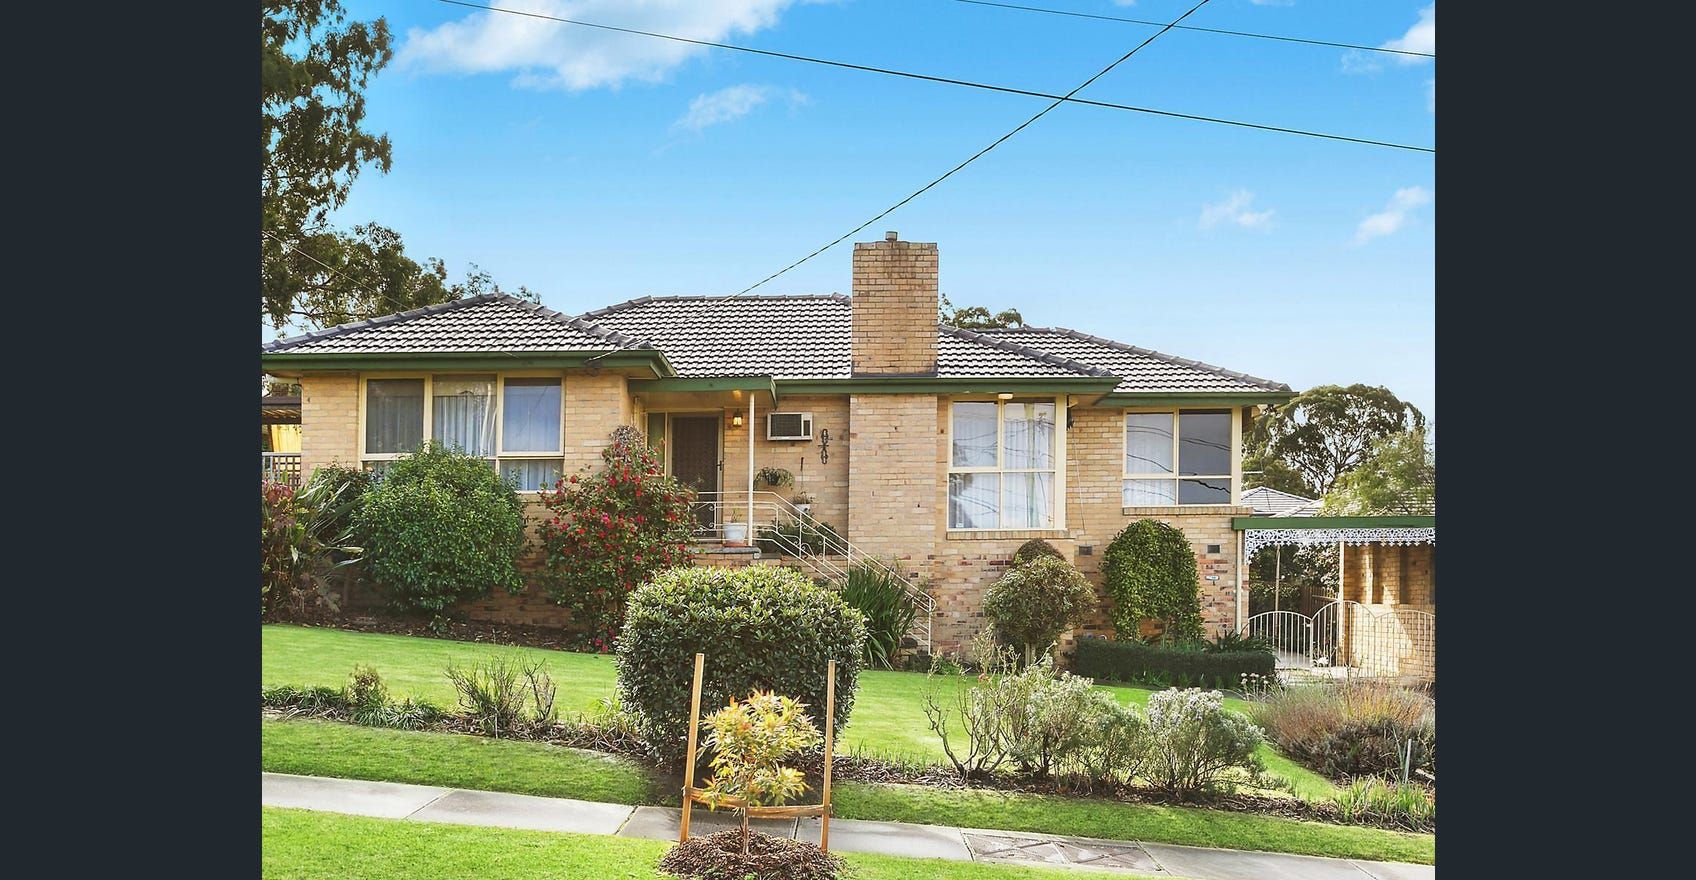 3 bedrooms House in 27 Good Governs Street MITCHAM VIC, 3132